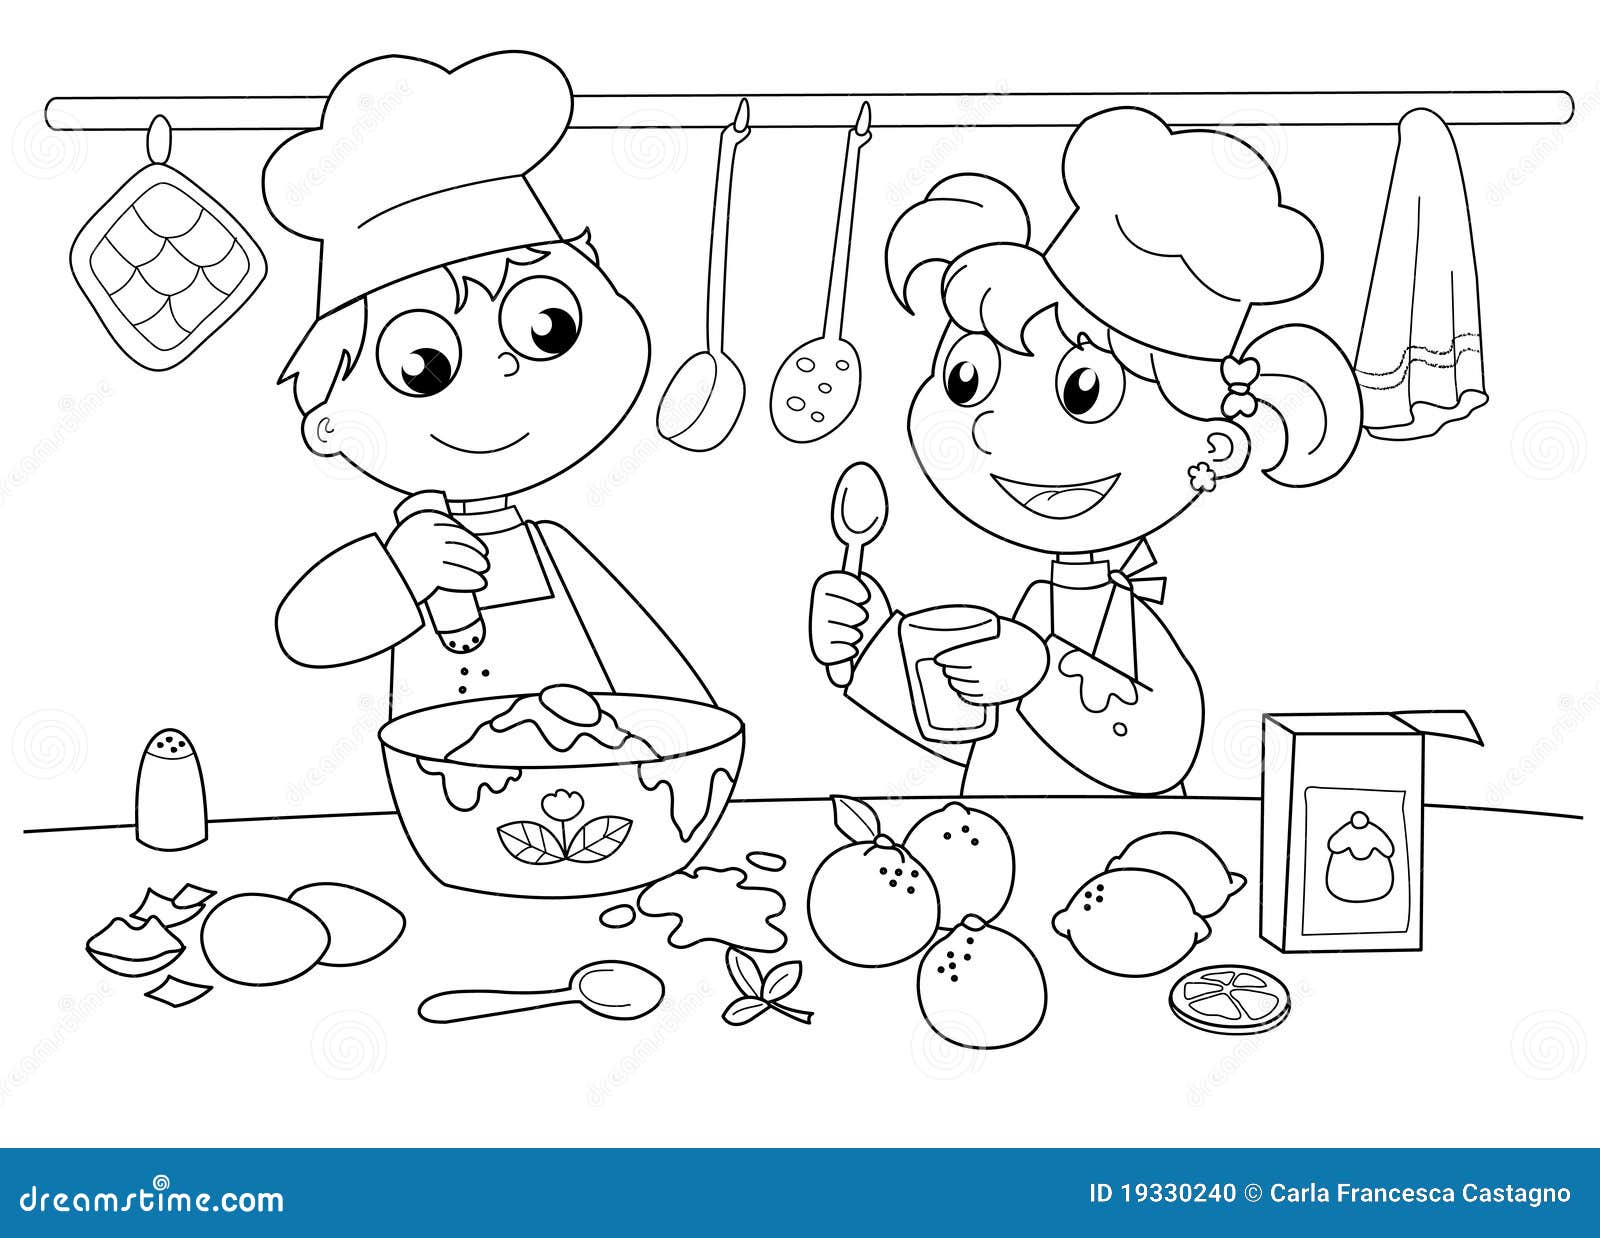 Little Spaceship Coloring Page For Kids Outline Sketch Drawing Vector,line  Art,kitchen Appliance PNG Transparent Background And Clipart Image For Free  Download - Lovepik | 380528036